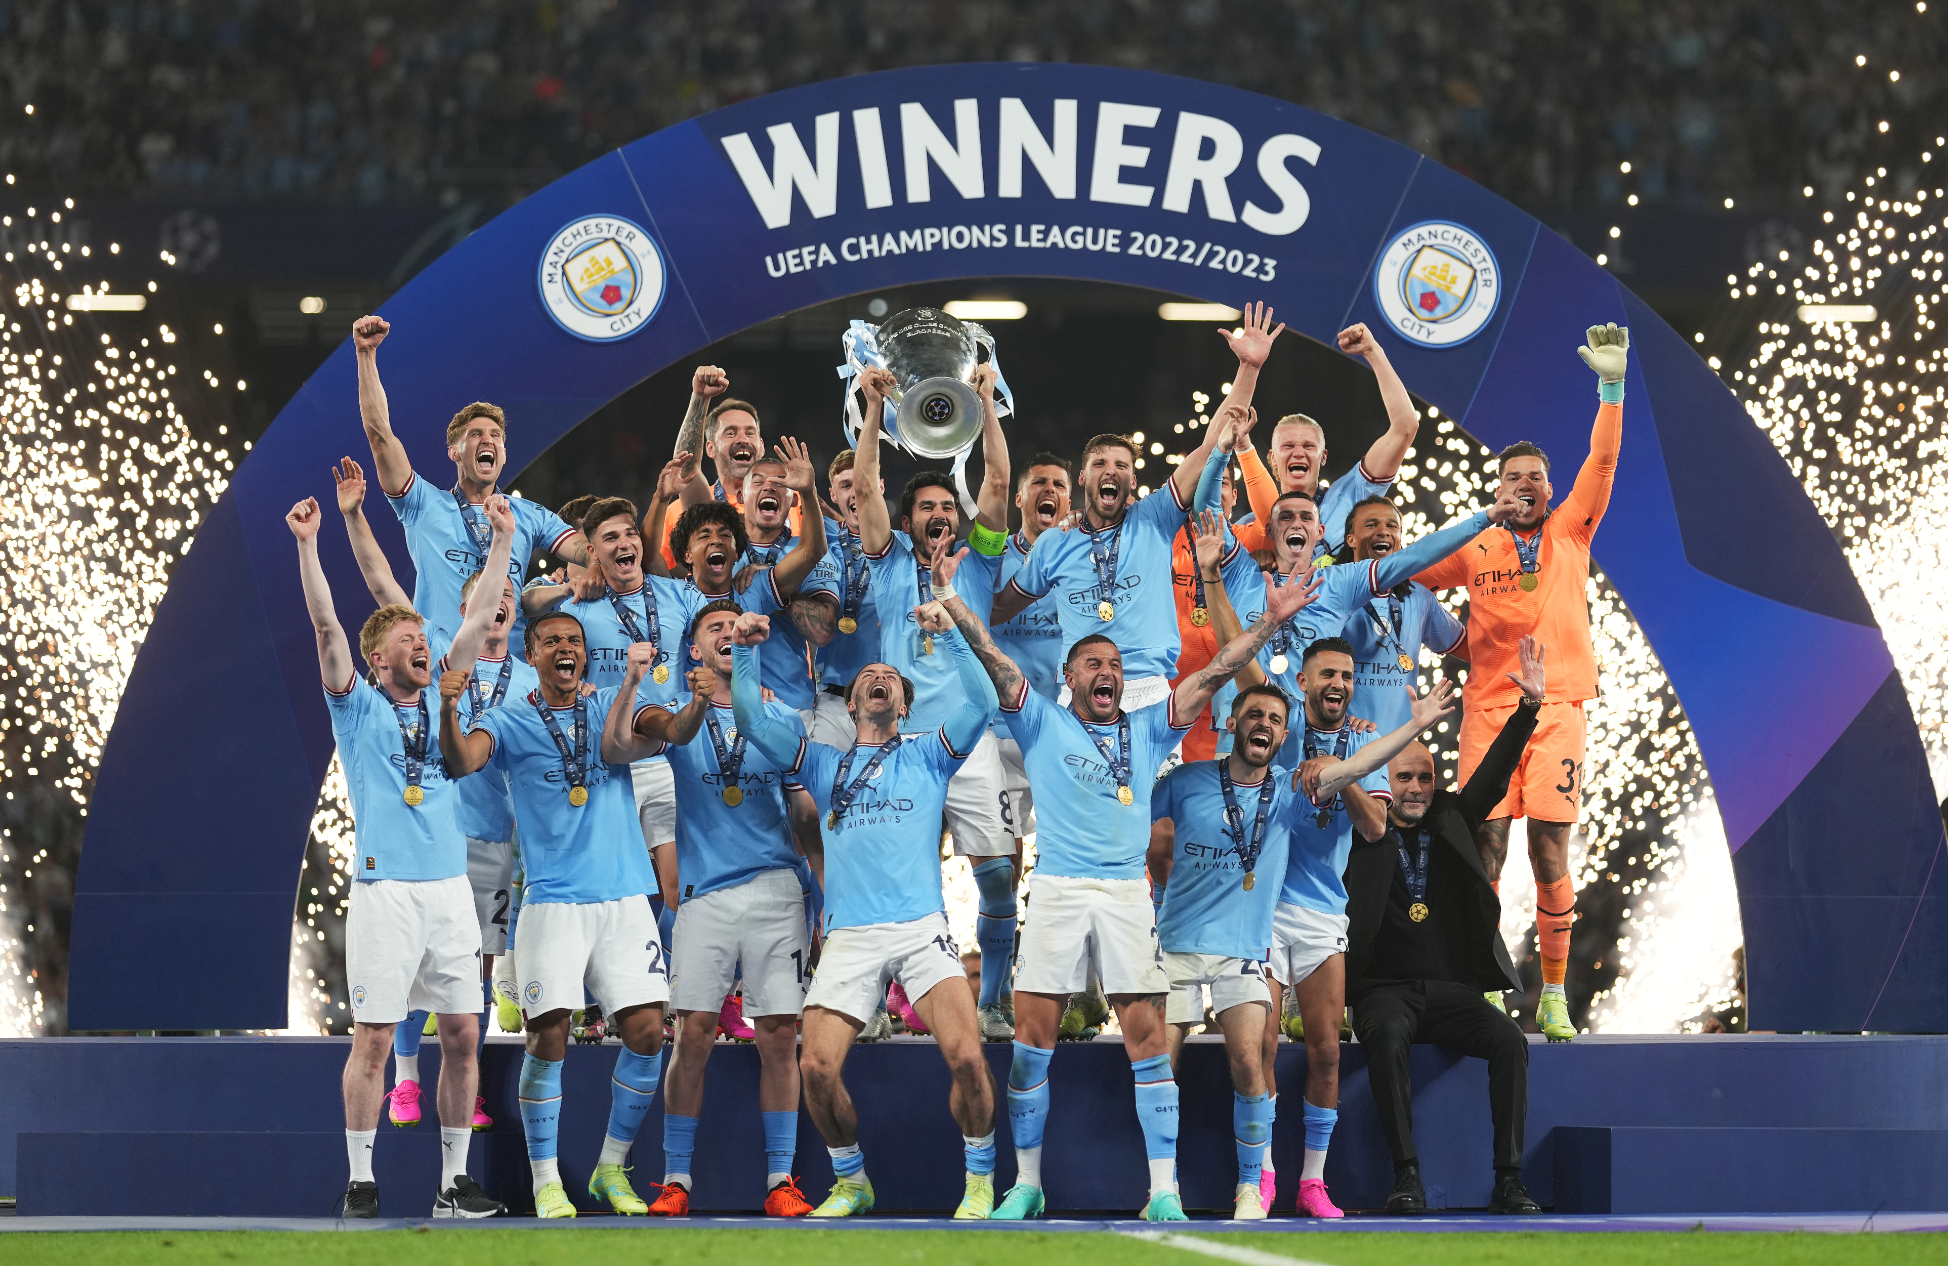 Manchester City Win the UEFA Champions League and secure the treble!